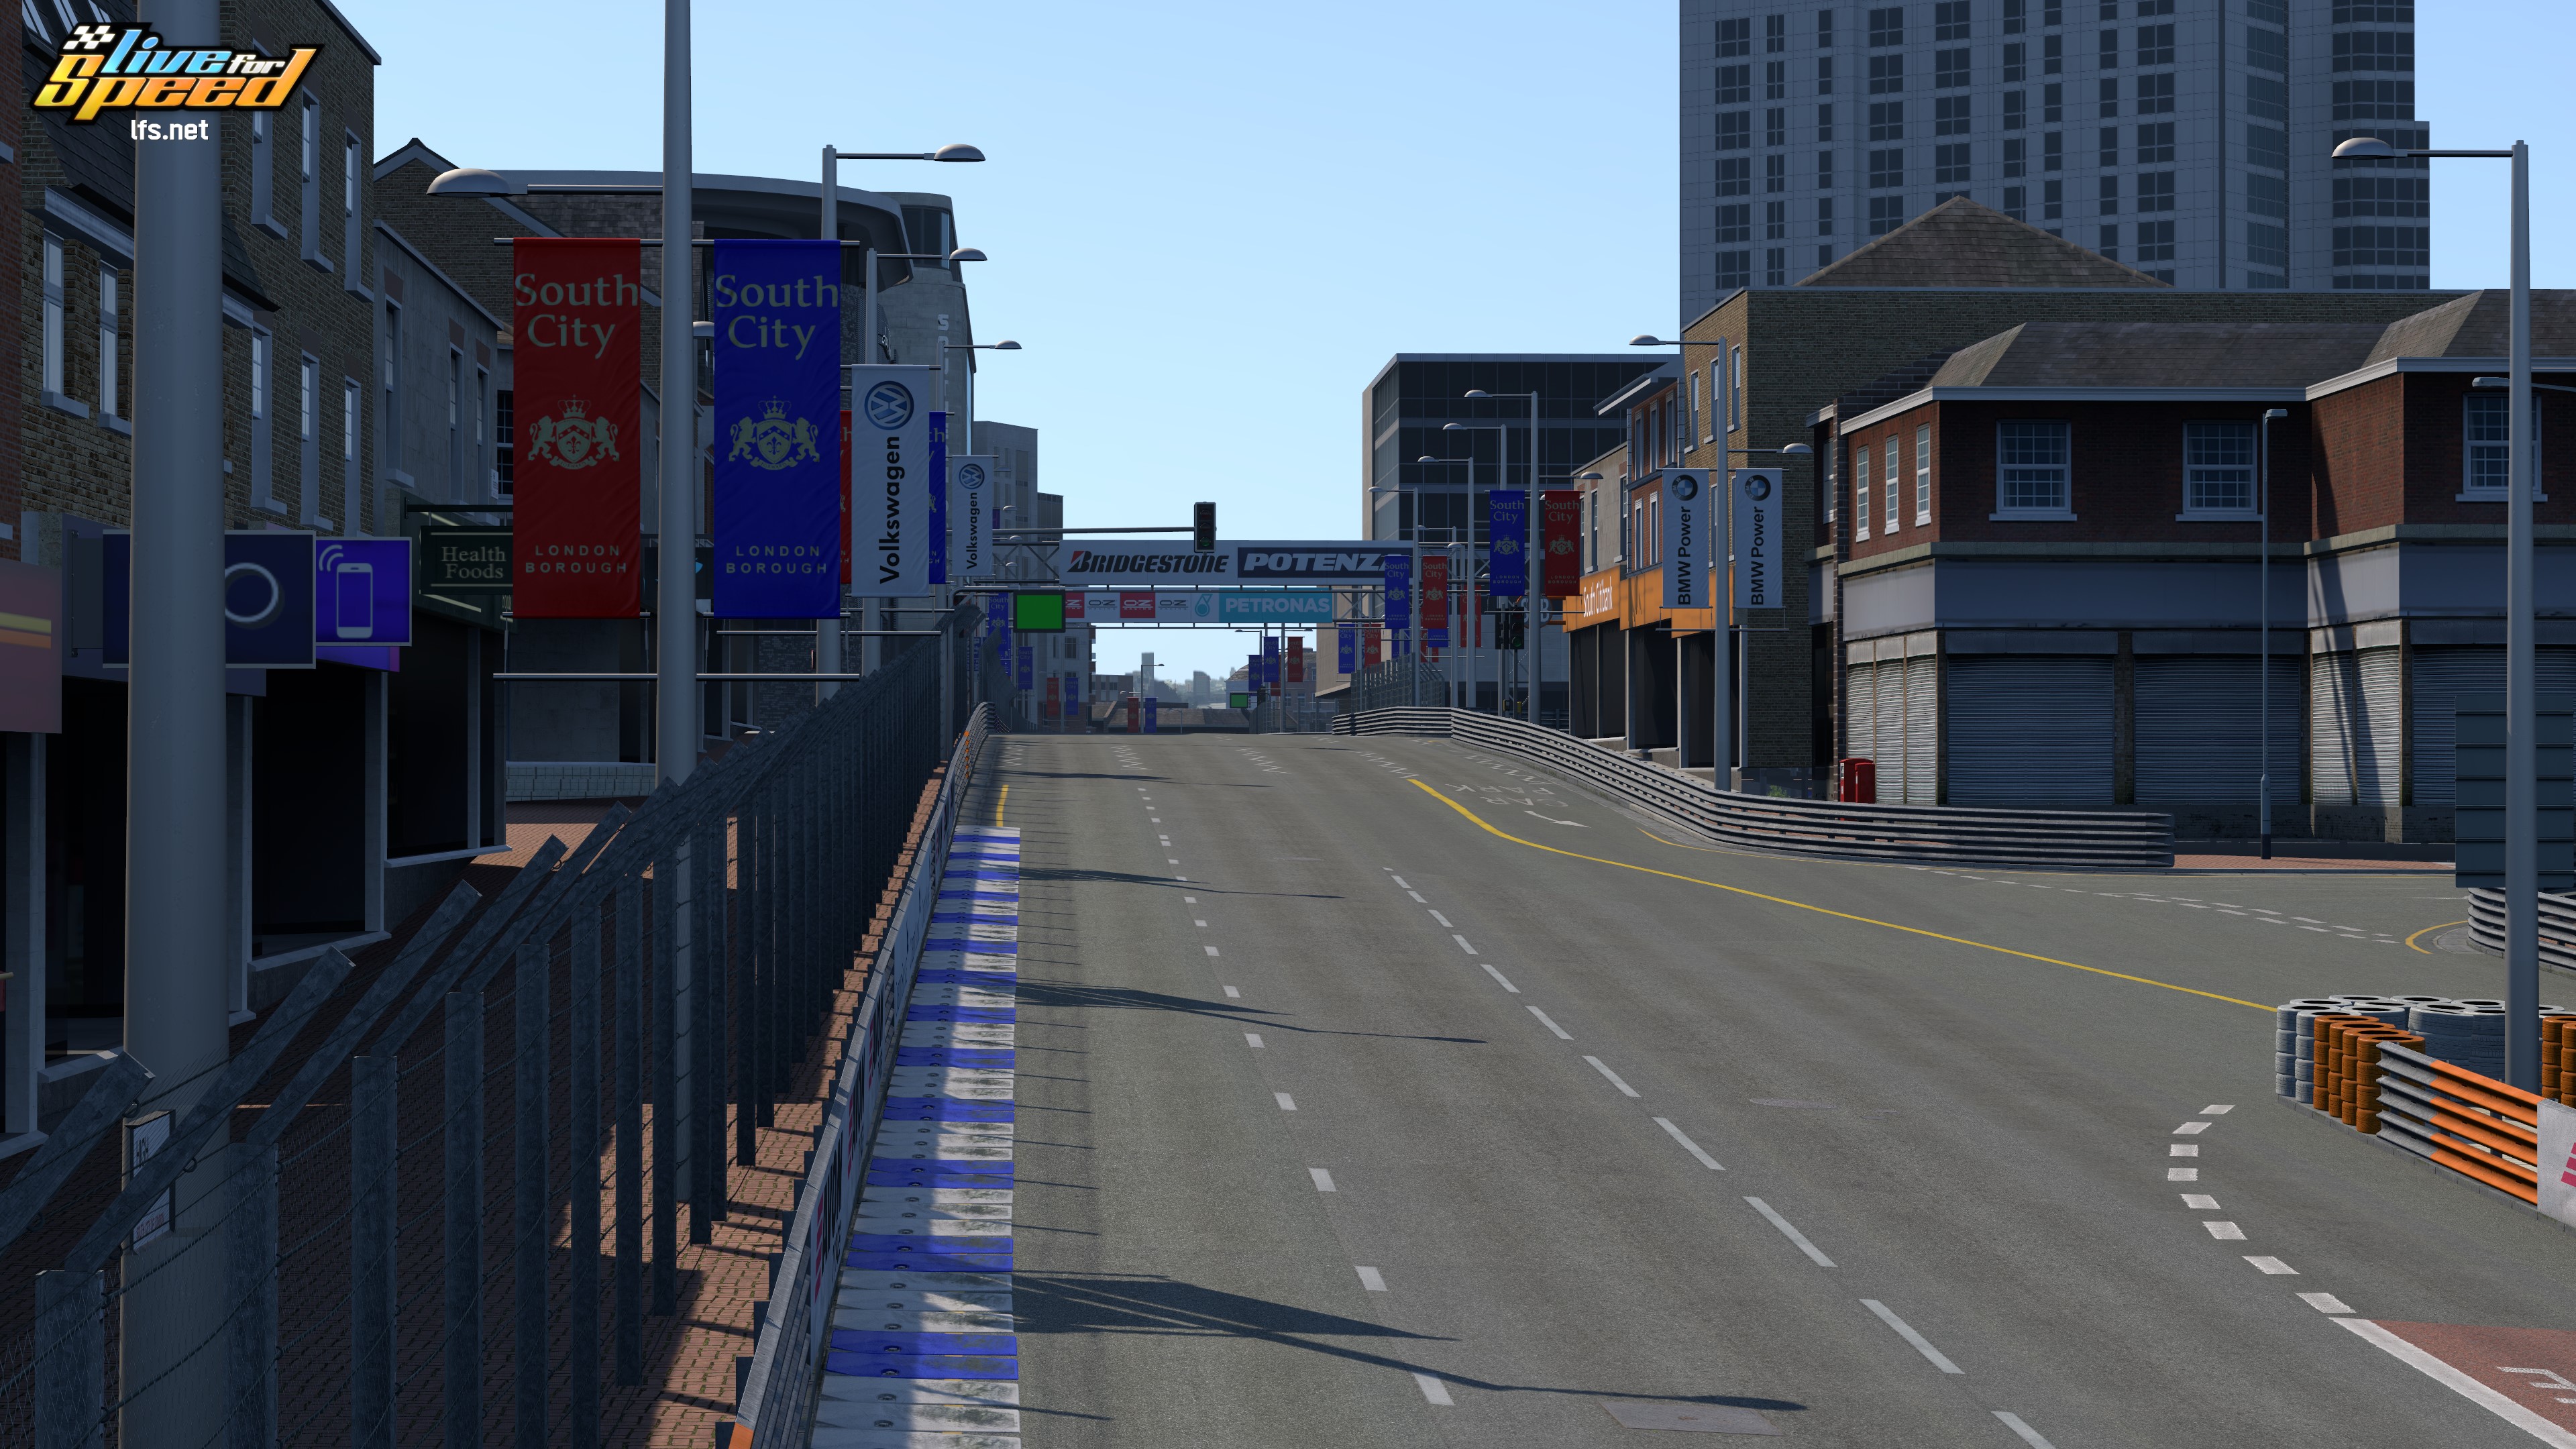 More information about "Live for Speed, Graphics Progress Report: South City"